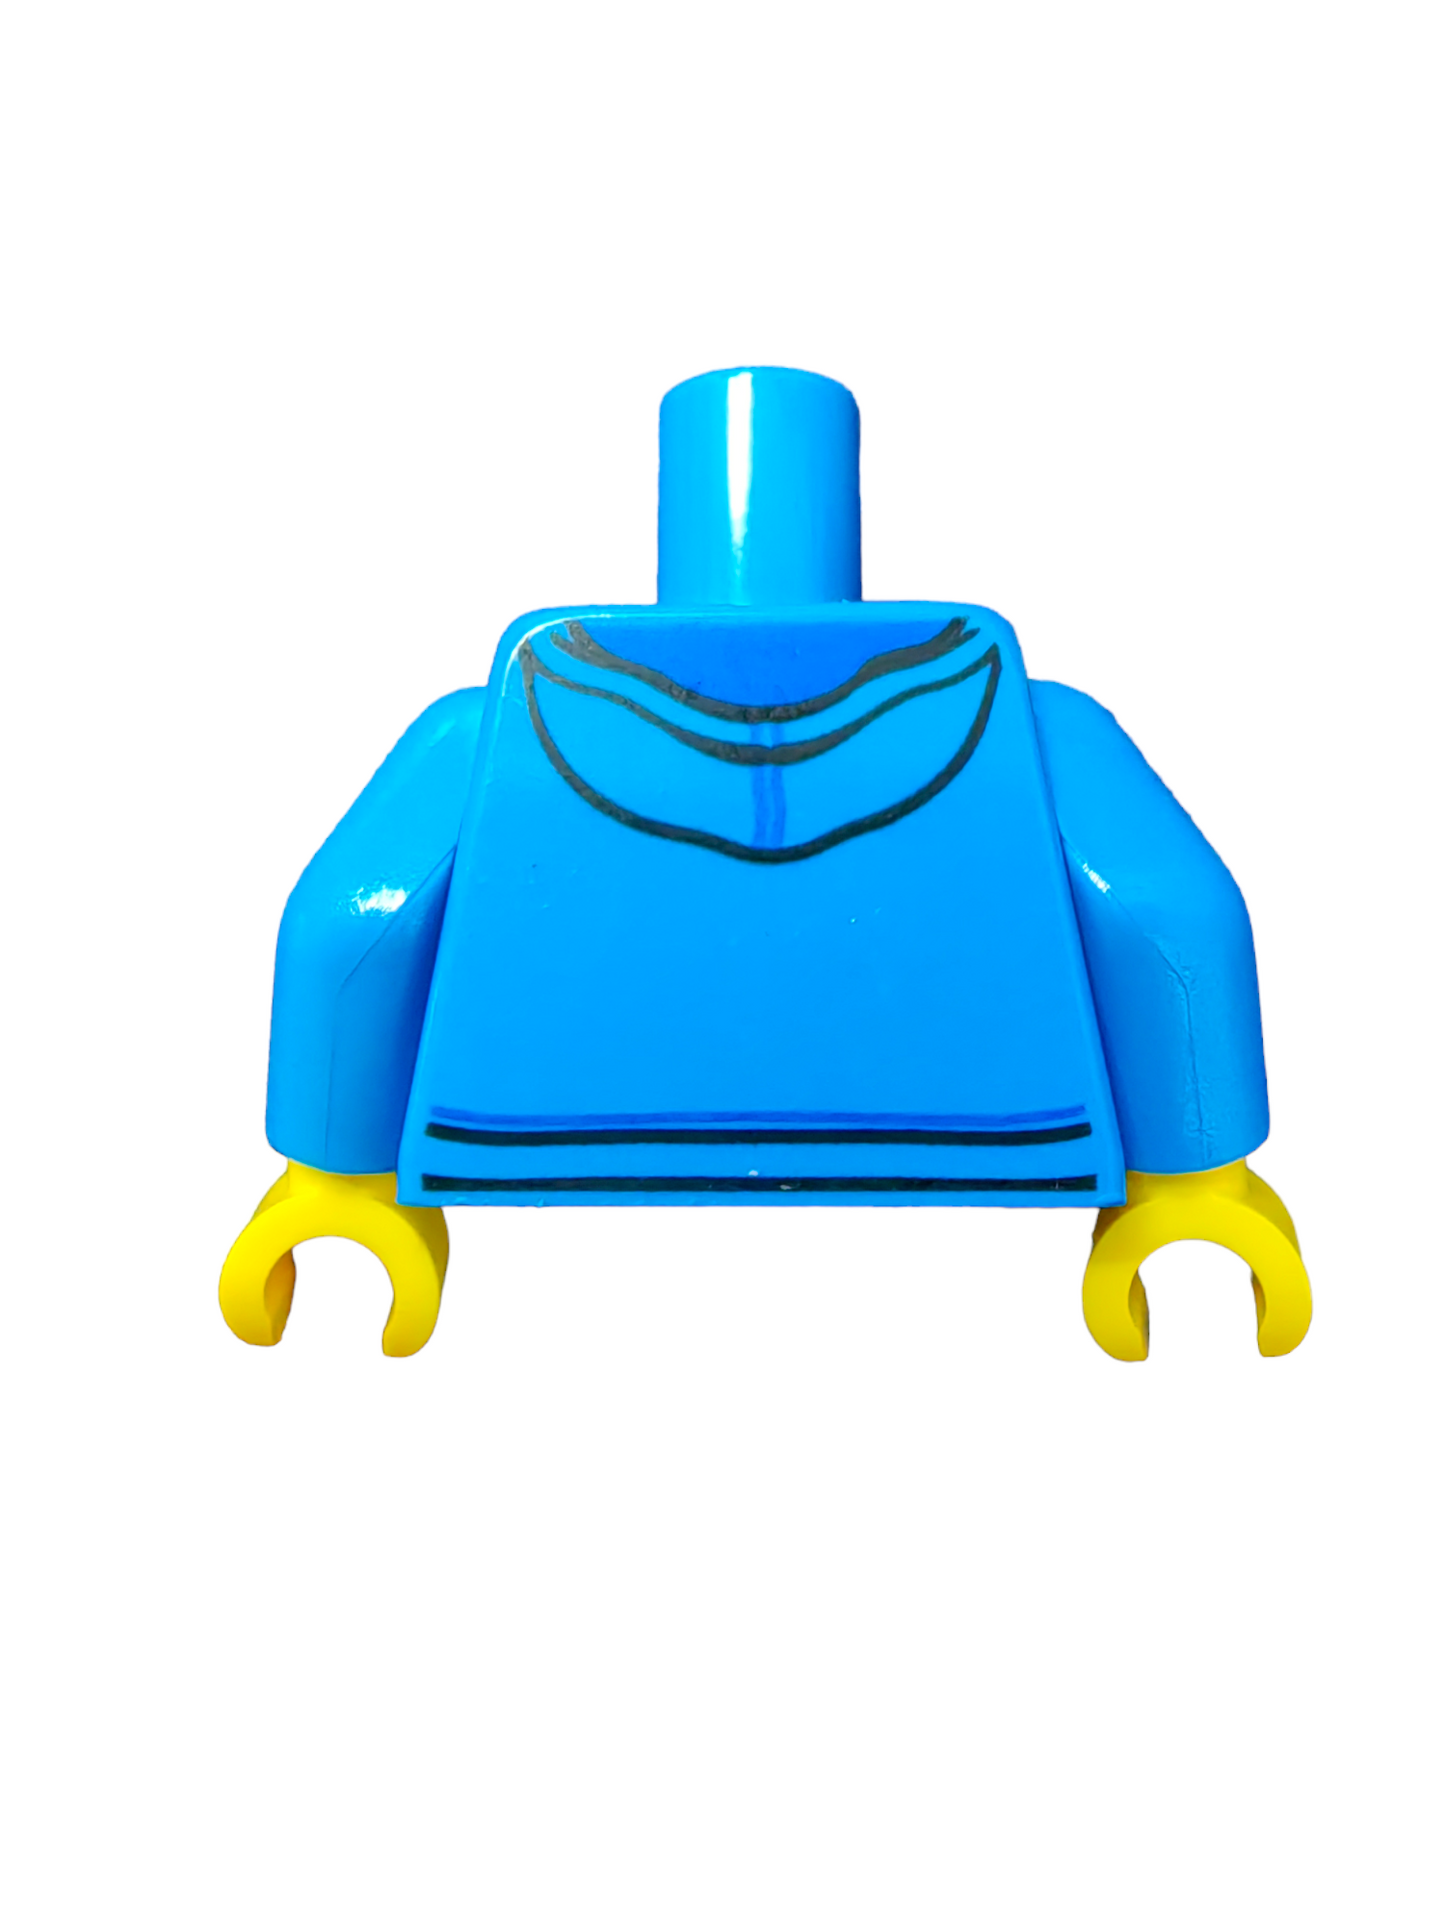 LEGO Torso, Blue Hoodie with Zip with a Lime and Green Striped Shirt - UB1110